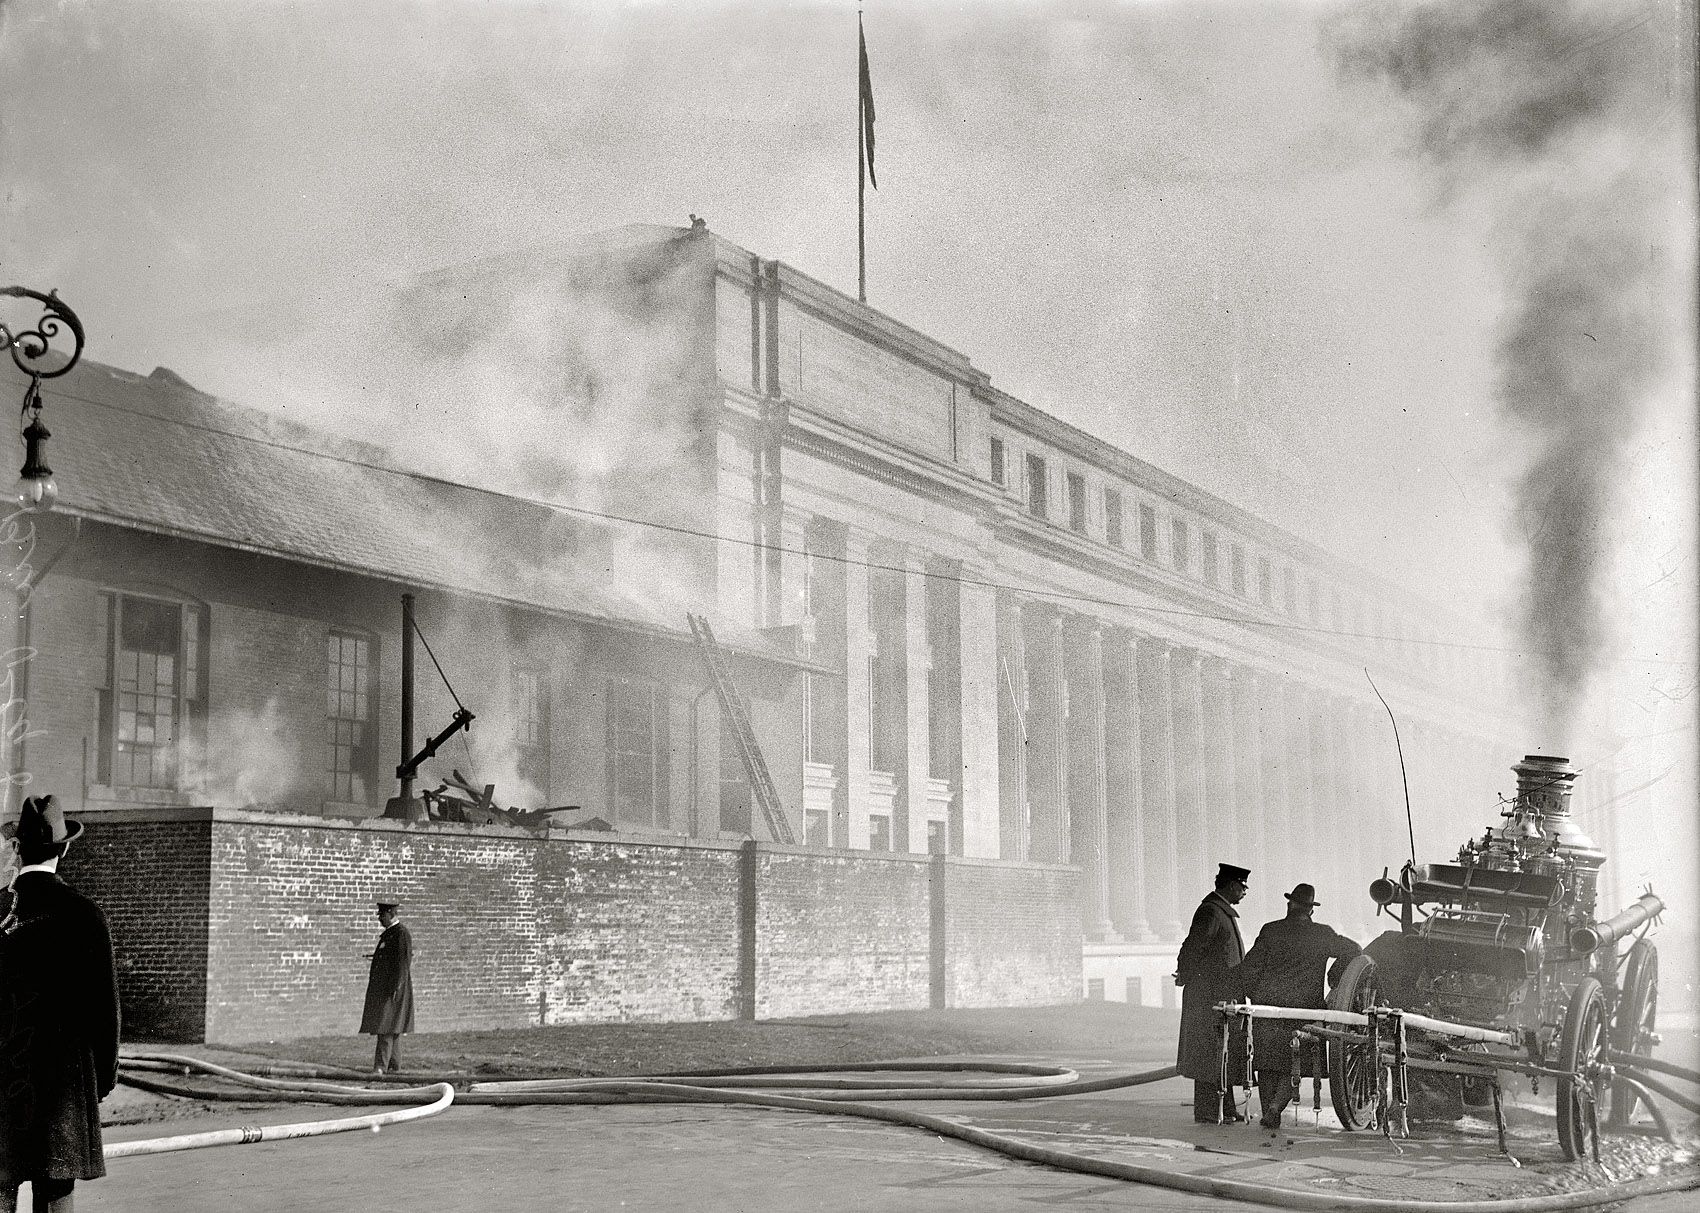 "Bureau of Engraving and Printing, Treasury Department. Fire, February 21, 1916, from spontaneous combustion." Harris & Ewing. View full size.